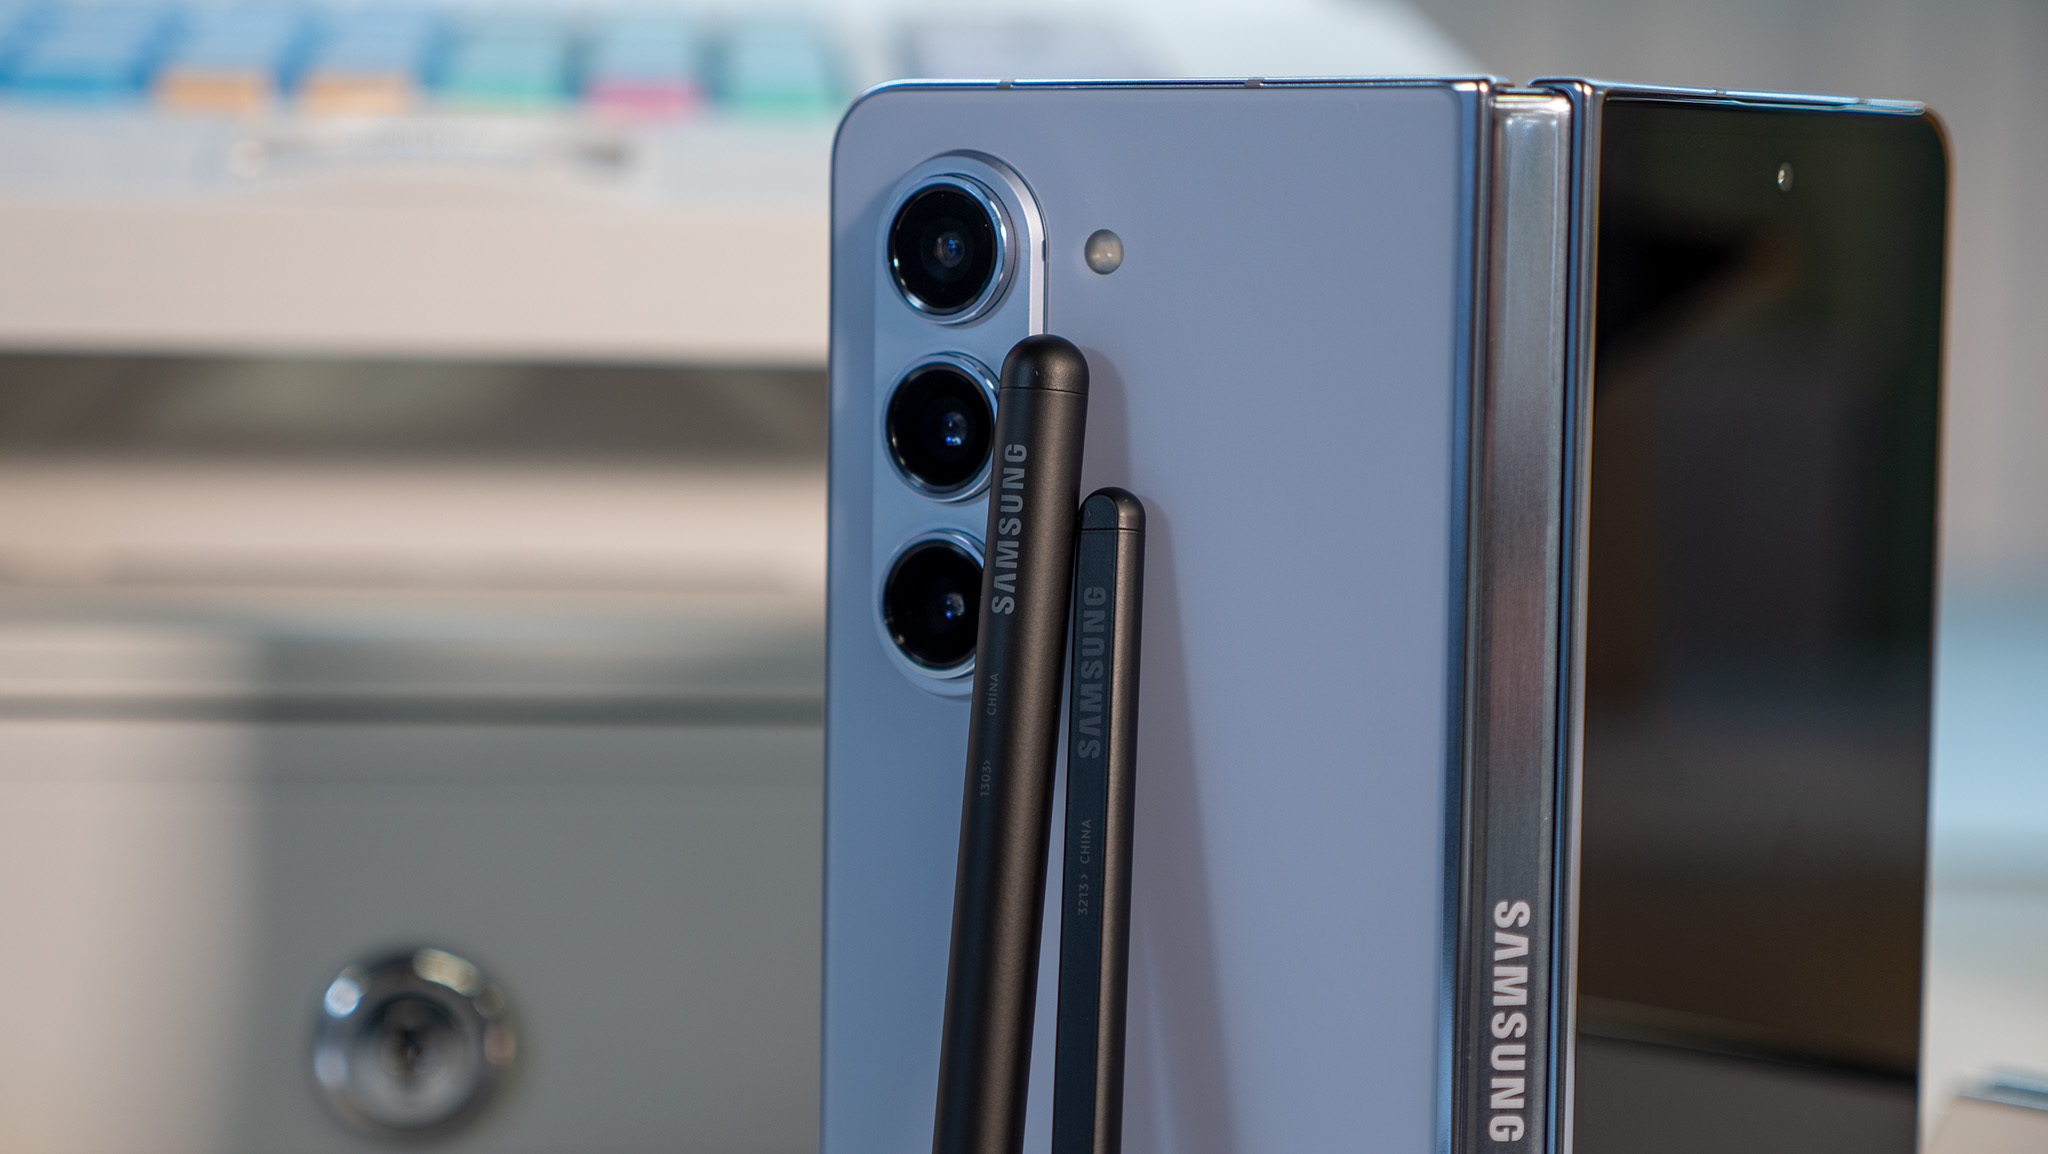 S Pen Fold Edition vs. S Pen Pro: What's the difference?